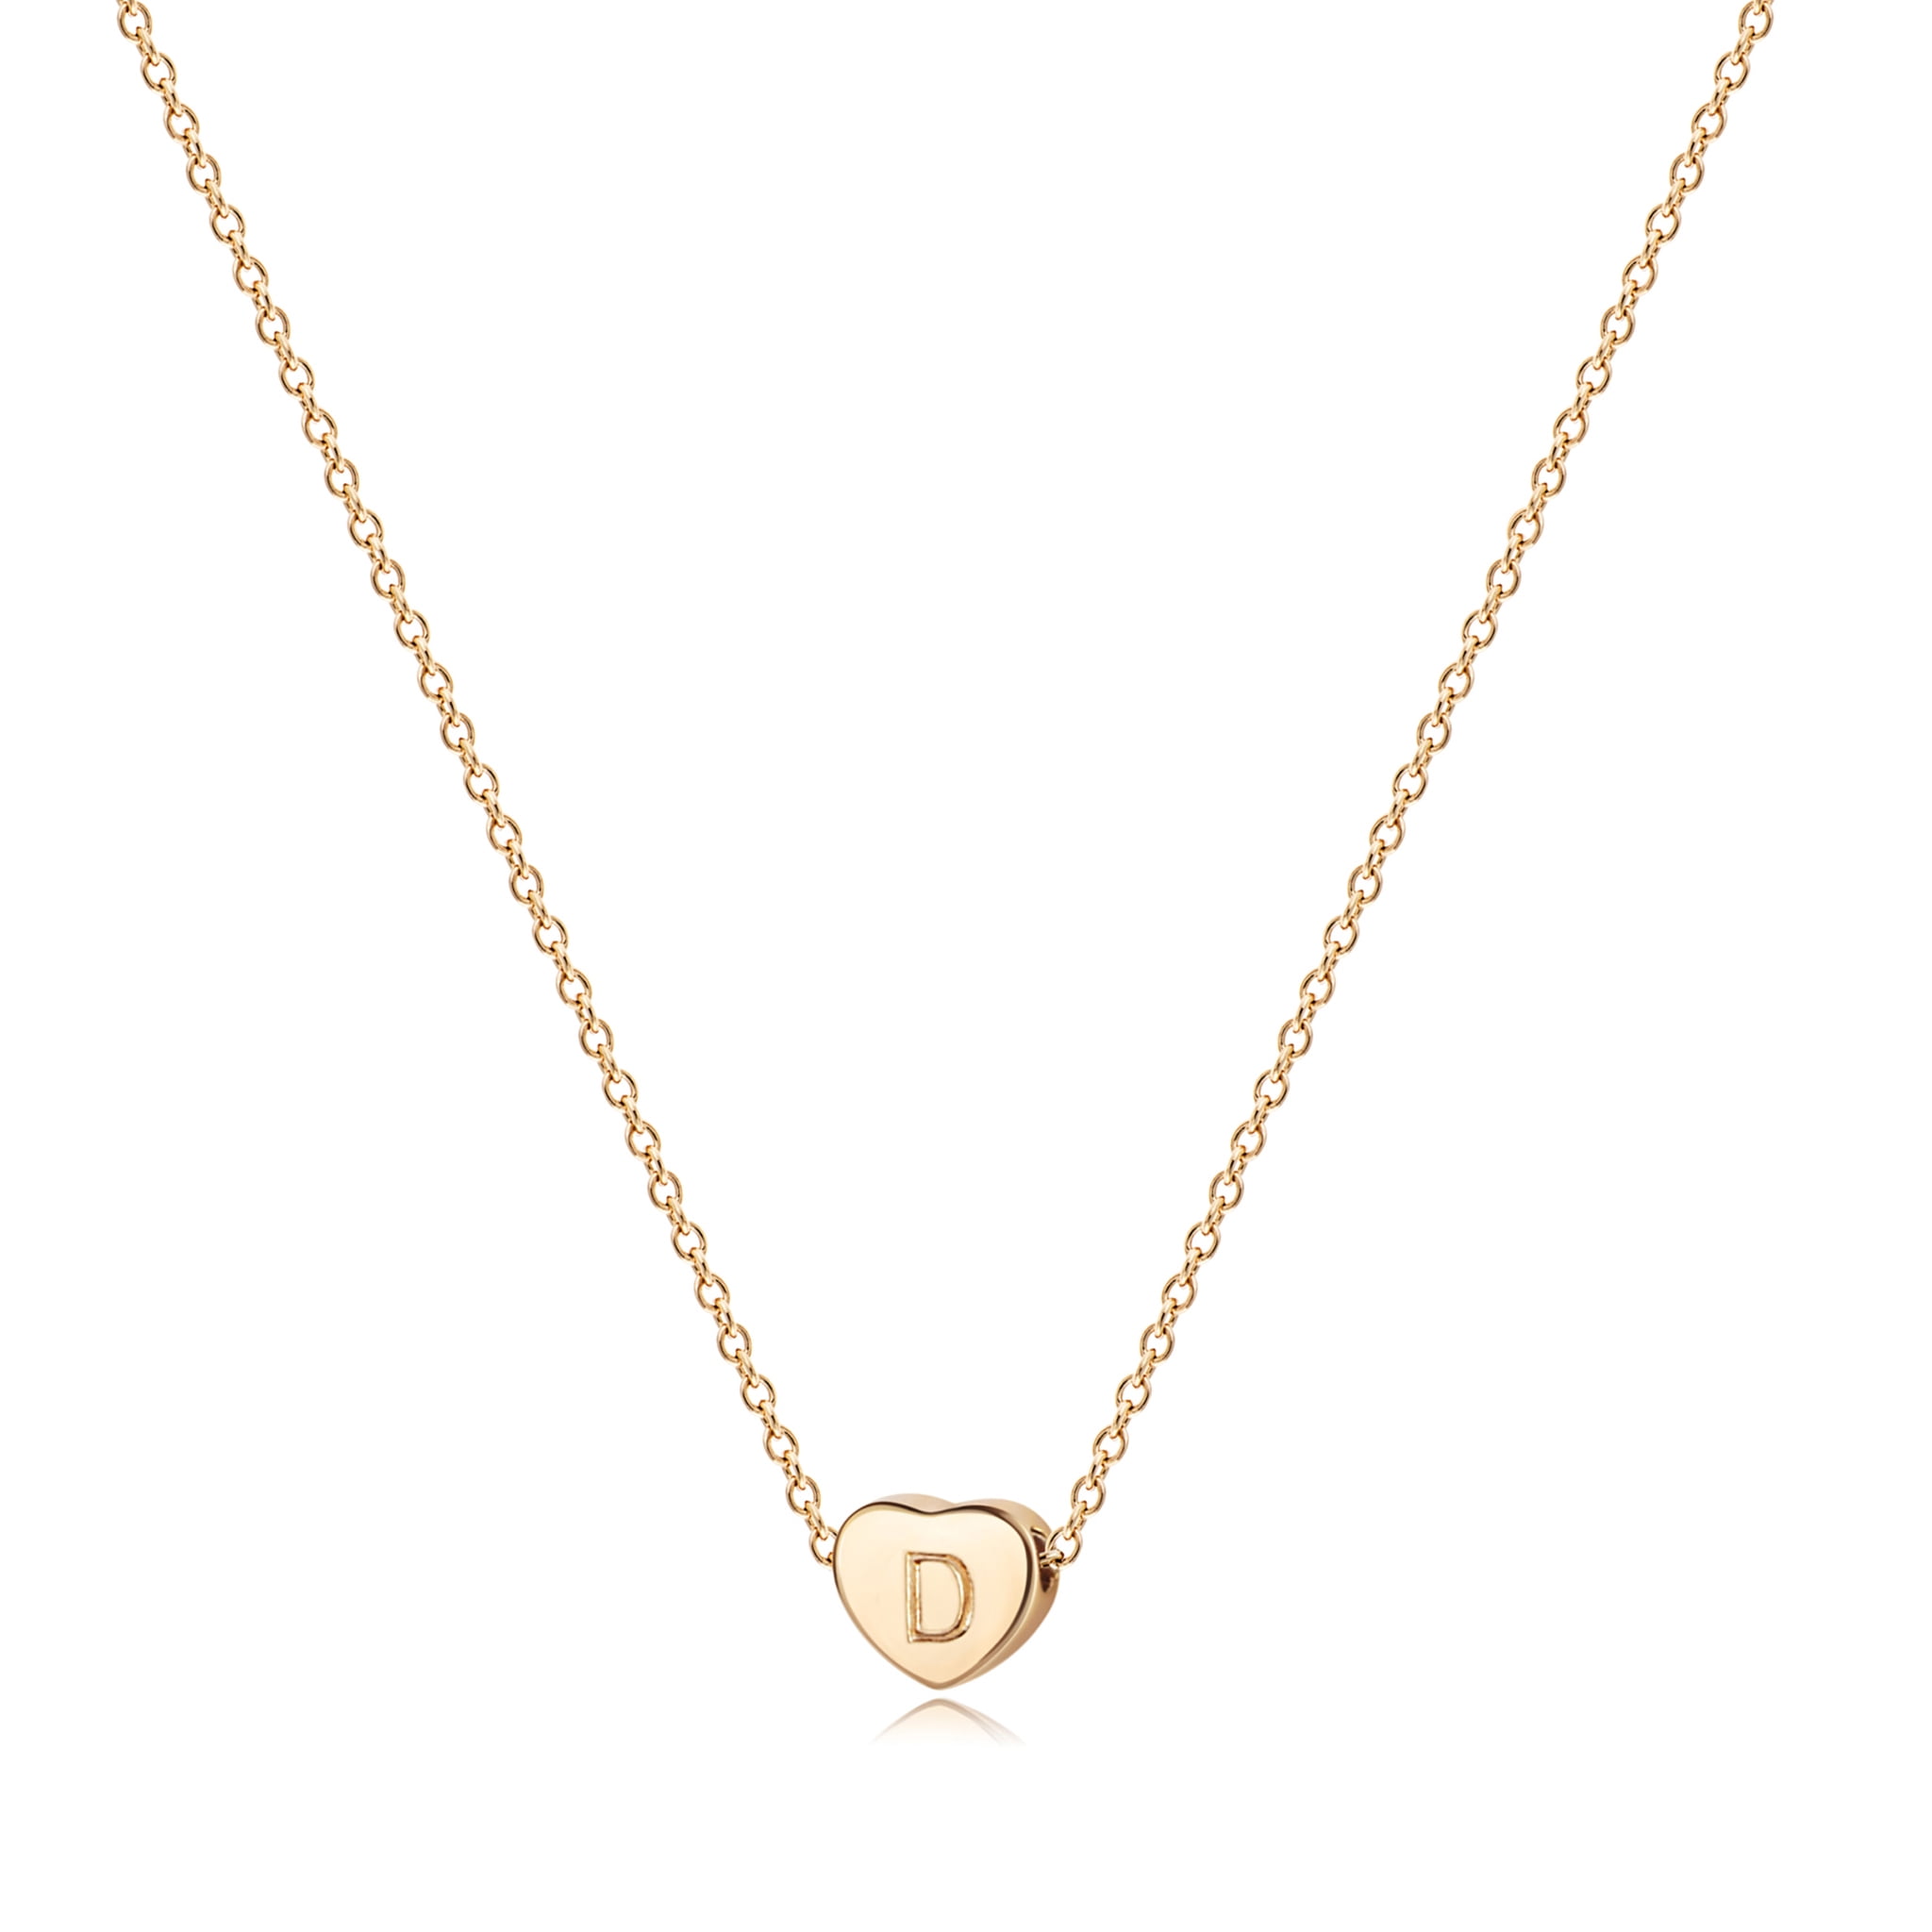 Cheap Gold Plated Letter T Charm Necklace For Girlfriend - Jewenoir